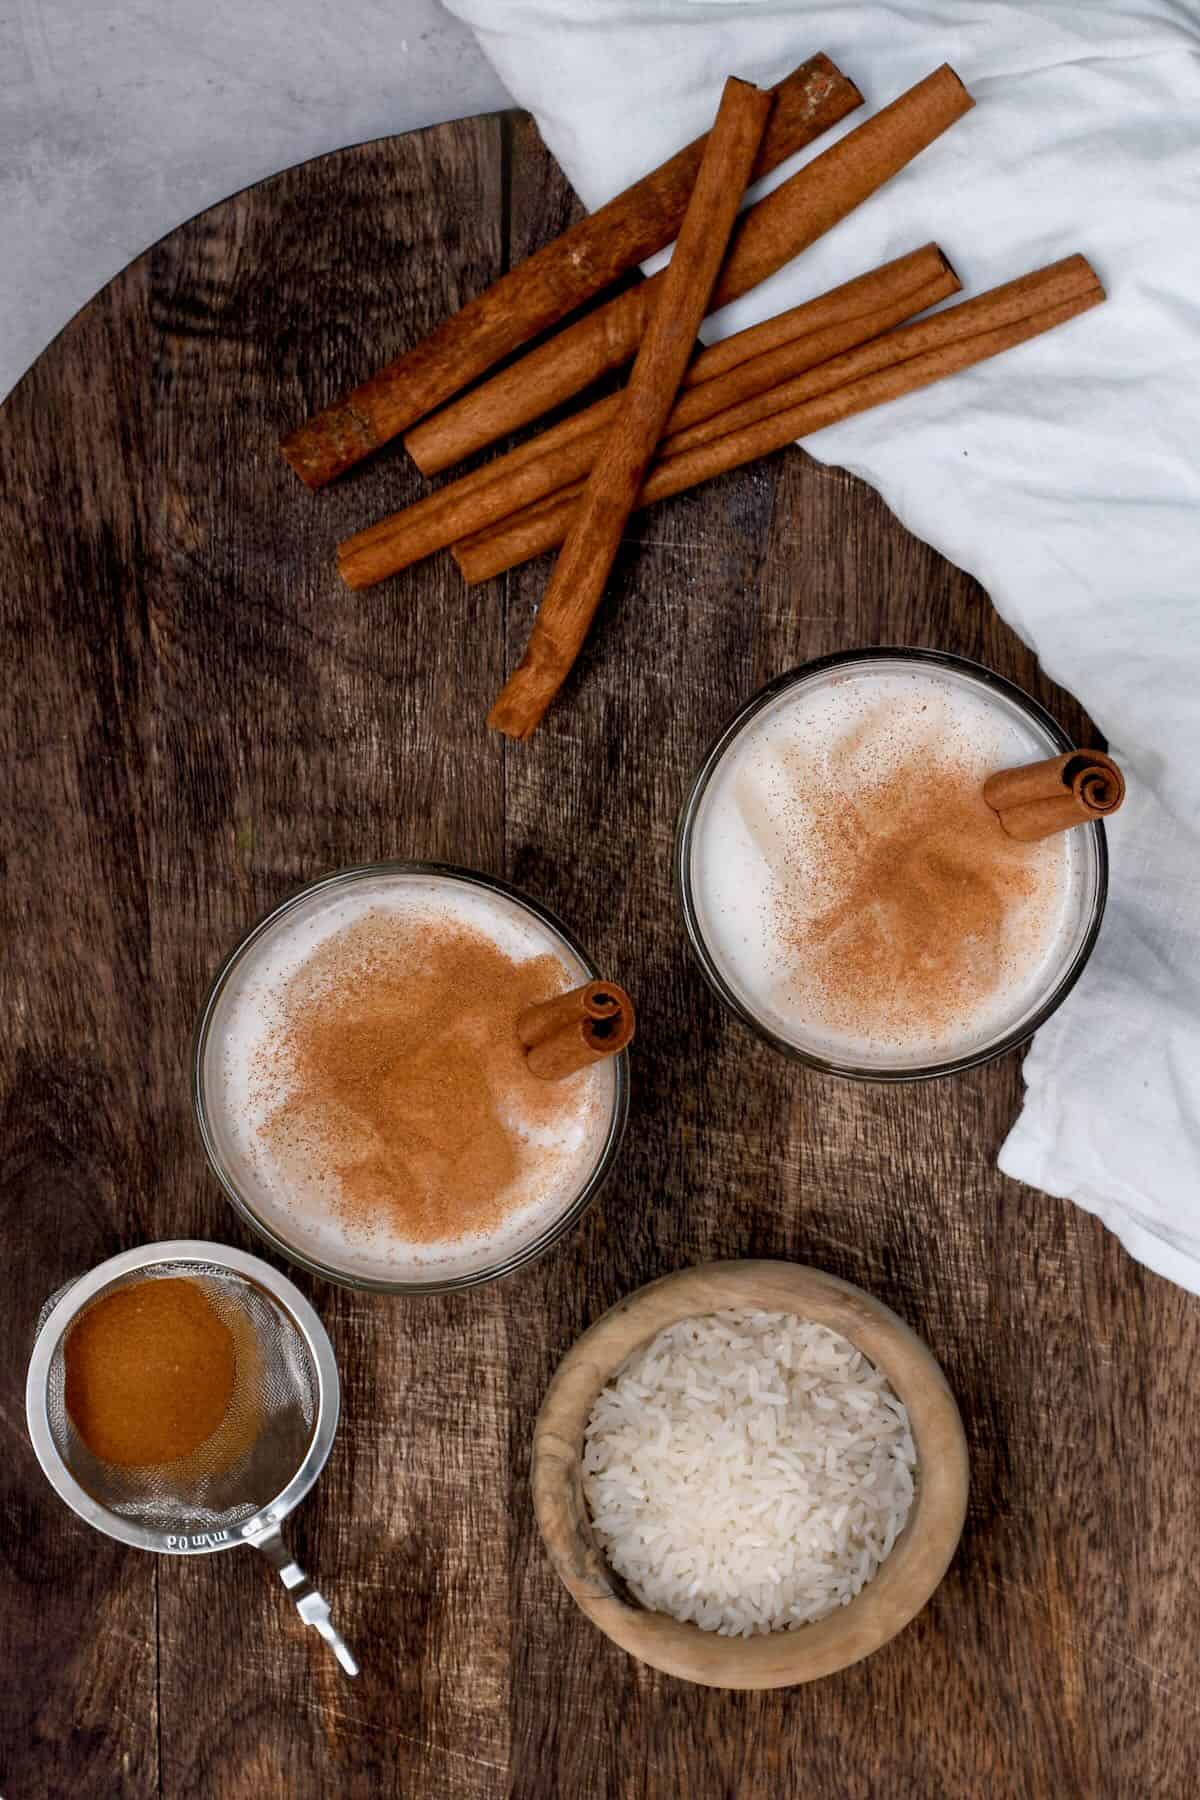 Top view of two glasses with horchata and a small bowl with rice, few cinnamon sticks and cinnamon powder